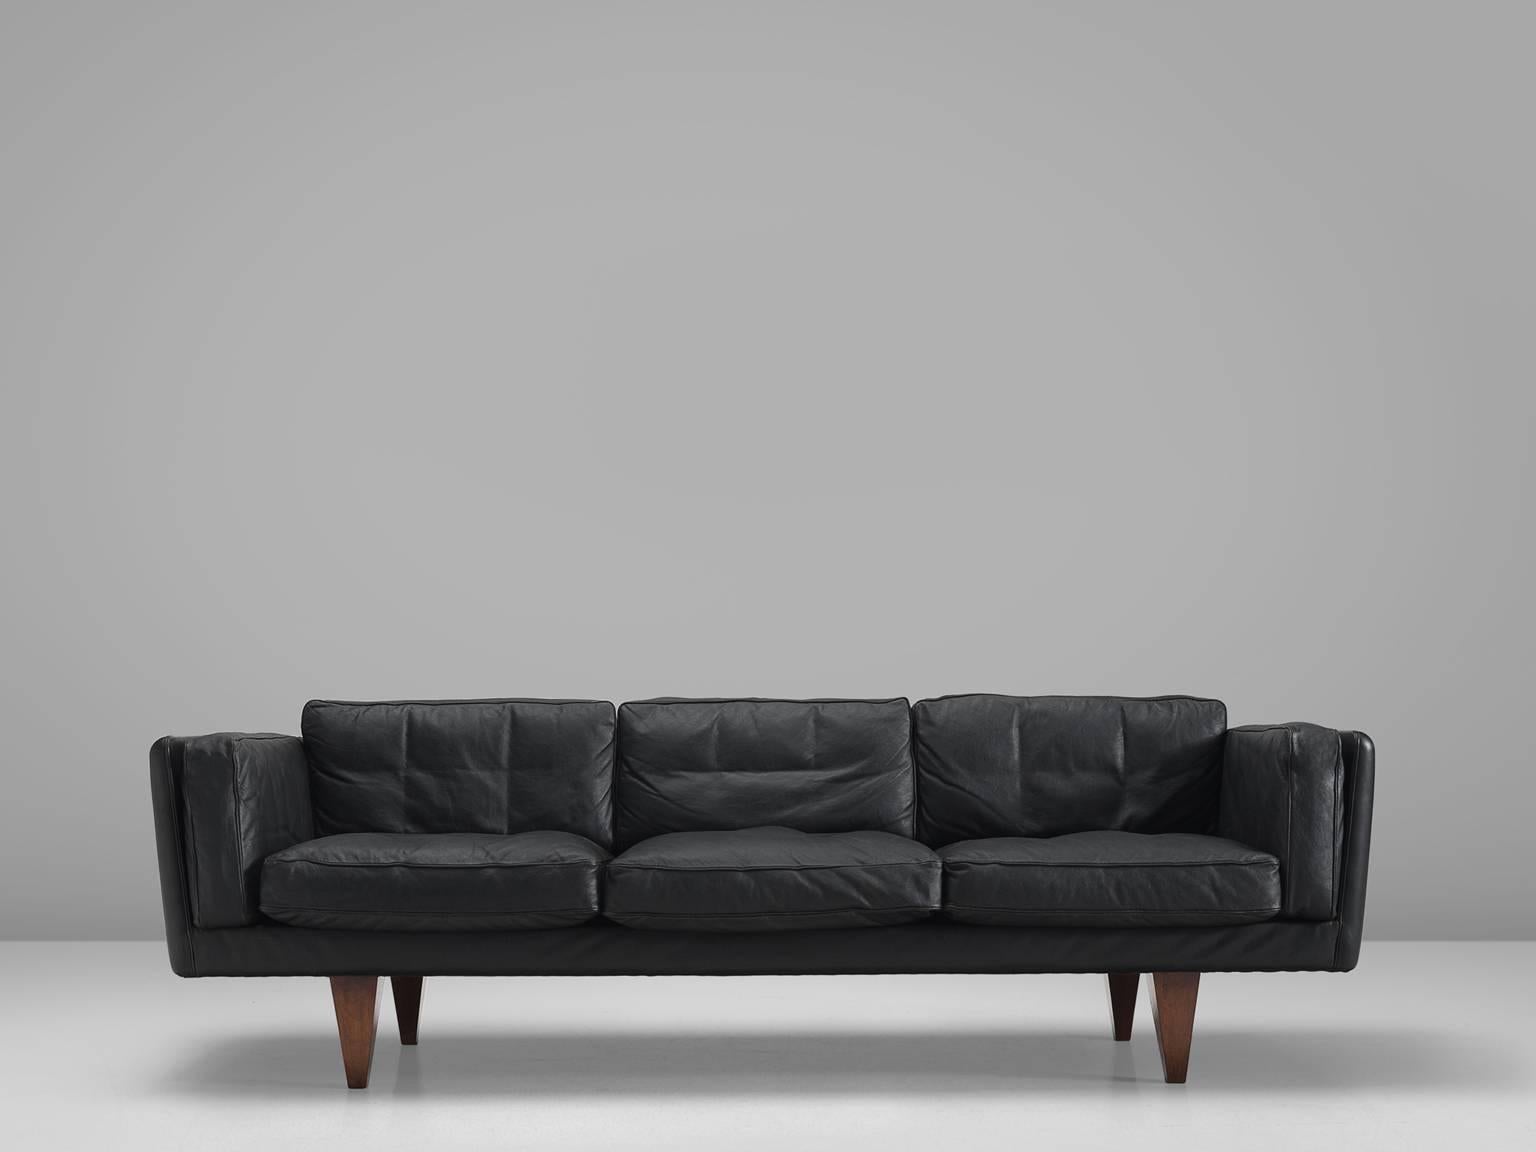 Illum Wikkelsø, sofa model 'V11' in leather and wood, Denmark, 1960s.

Stunningly three-seat sofa, designed by Danish designer Illum Wikkelsø. Highly comfortable and beautiful designed sofa with original leather upholstery. The deep black high